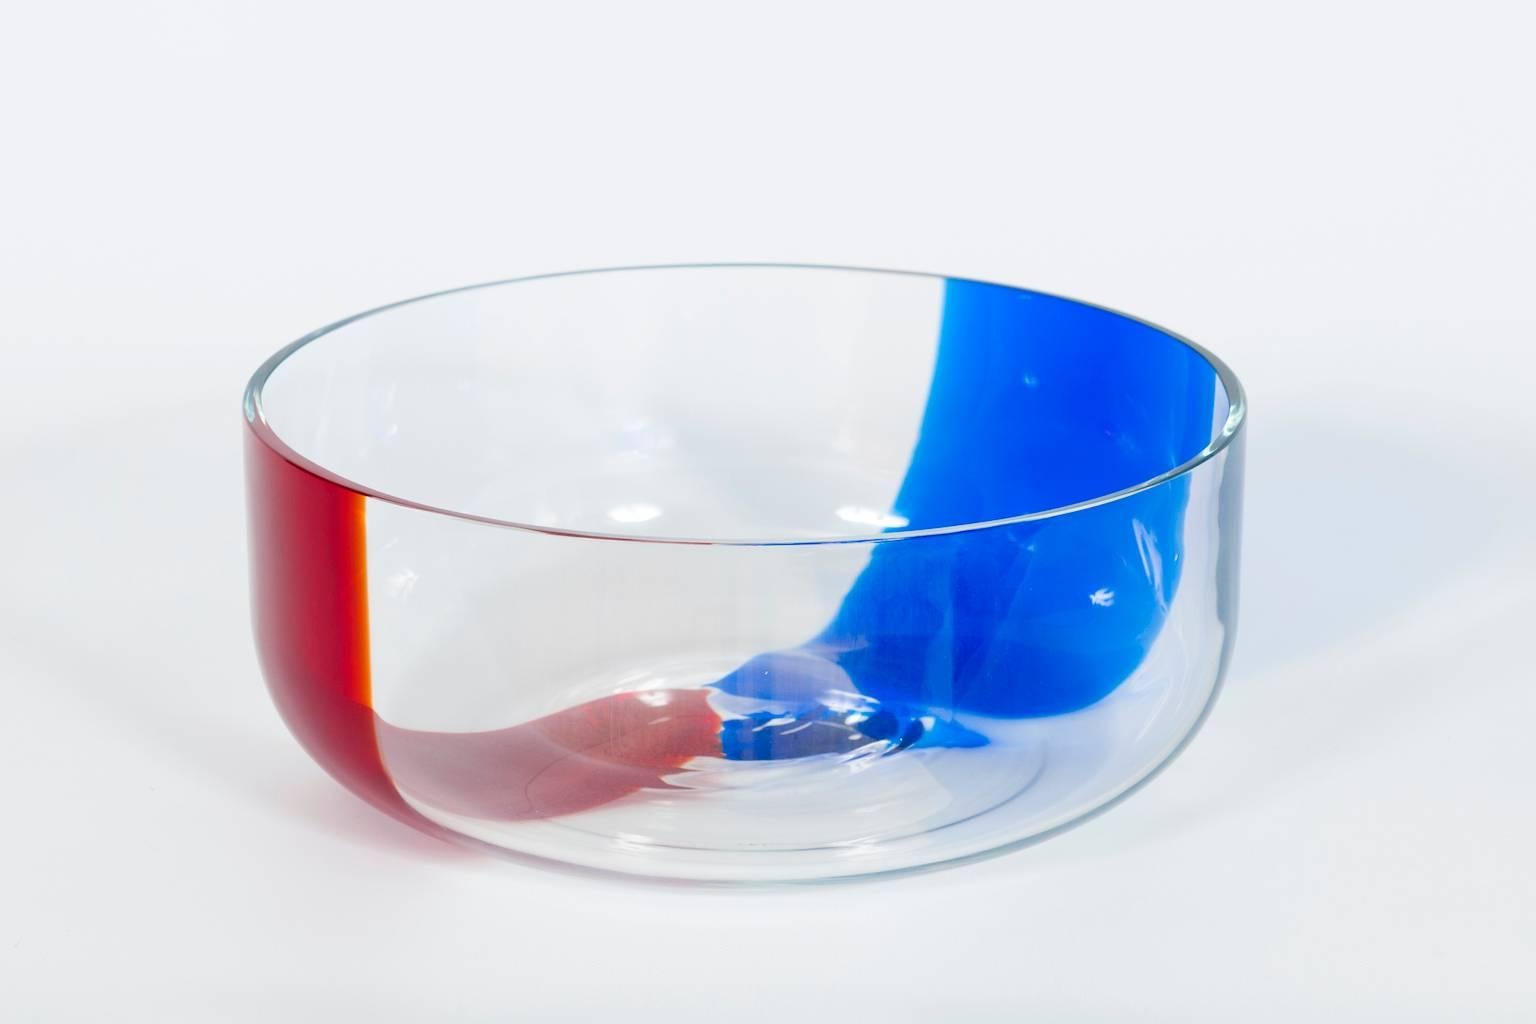 Massive and Gorgeous, Italian Venetian, Bowl, Blown Murano Glass, Blue Red Transparent, Donà, 1990s.
This is a unique portrait in blown Murano glass, entirely handcrafted in the Venetian Murano island. It is a unique blown item, melting in the